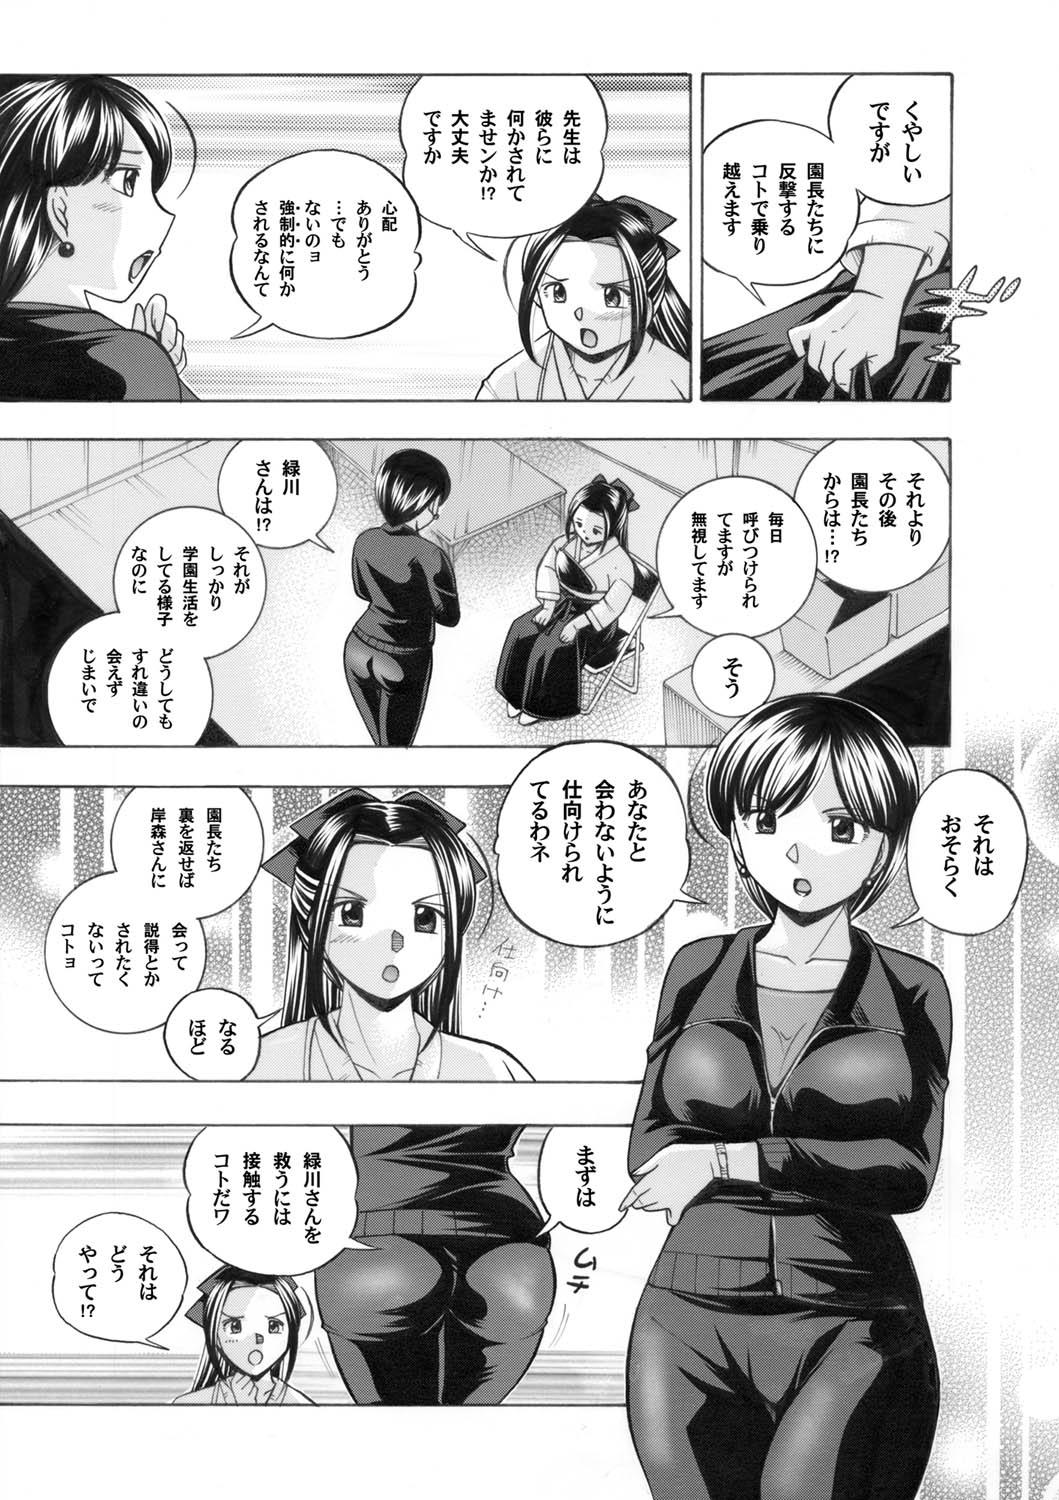 Chinese COMIC Magnum Vol. 28 Tranny Sex - Page 4